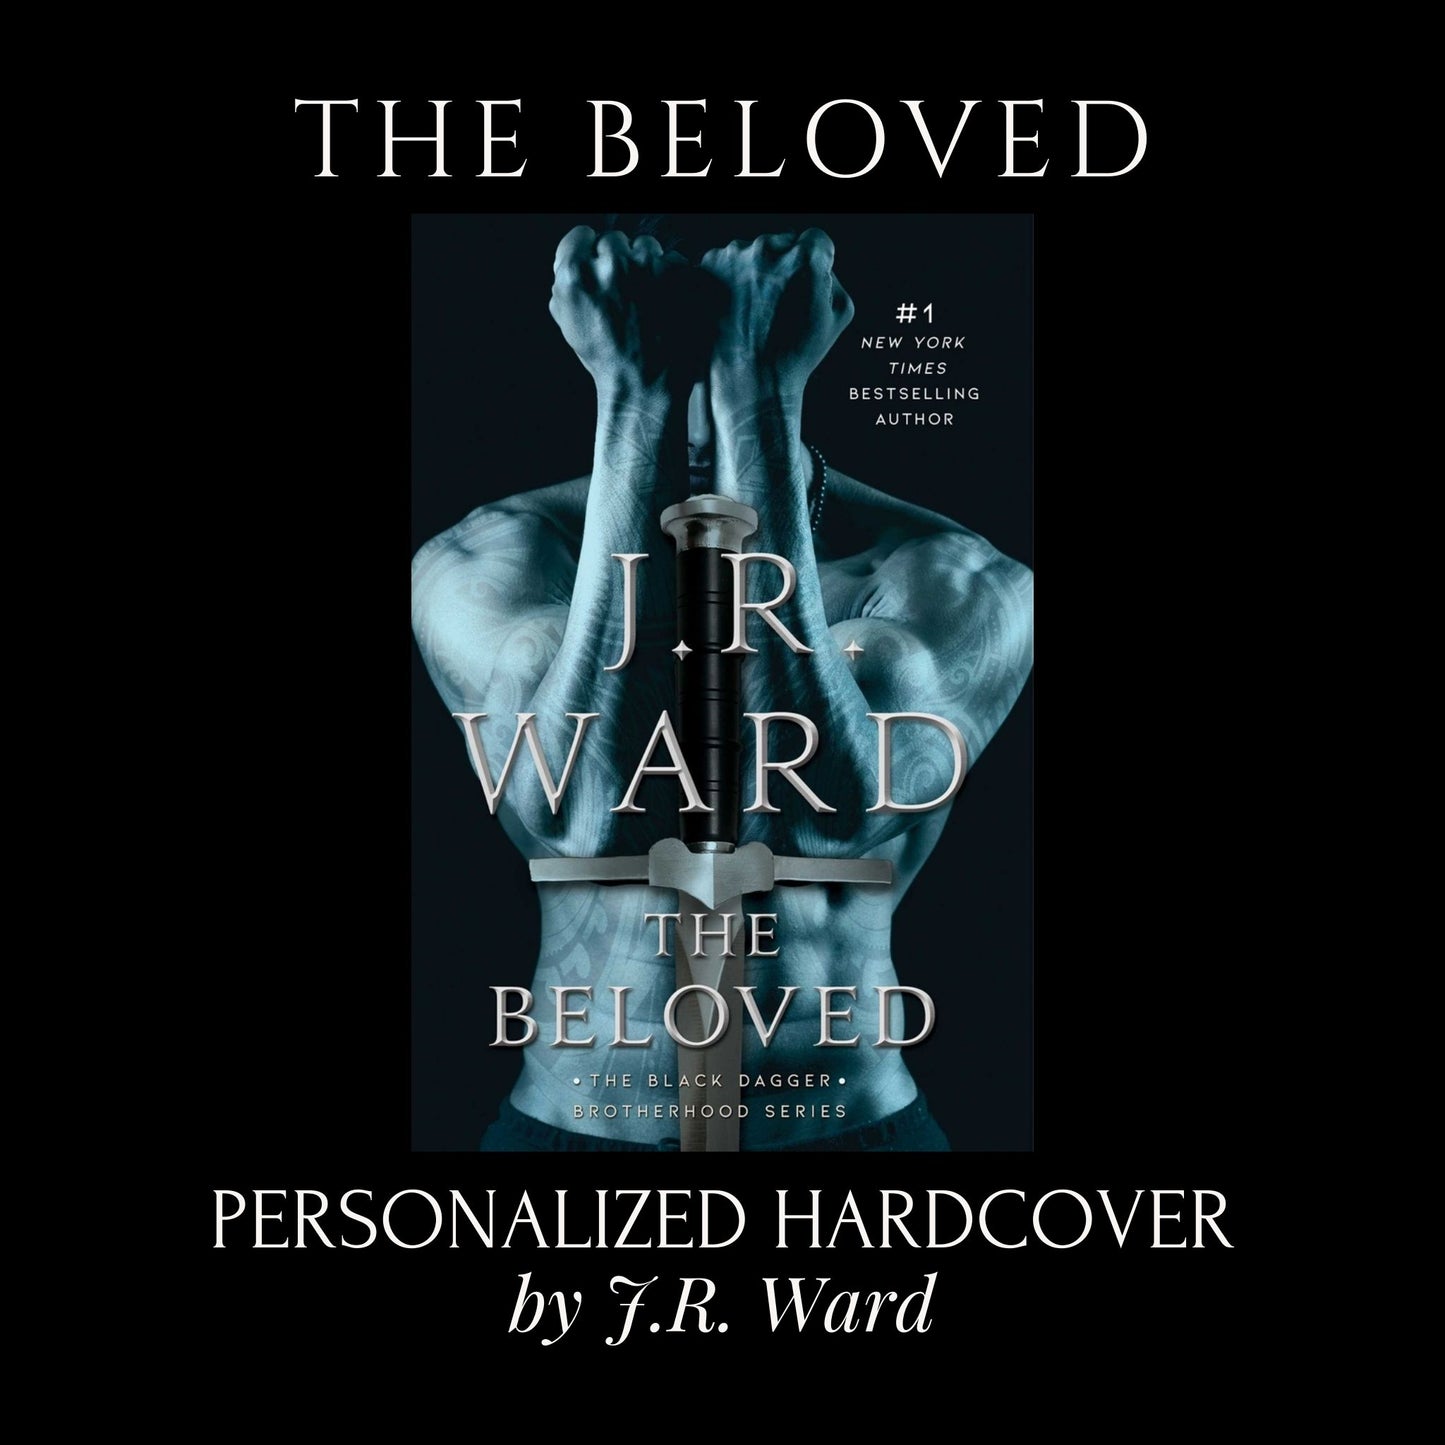 "THE BELOVED" Personalized Hardcover Book by J.R. Ward